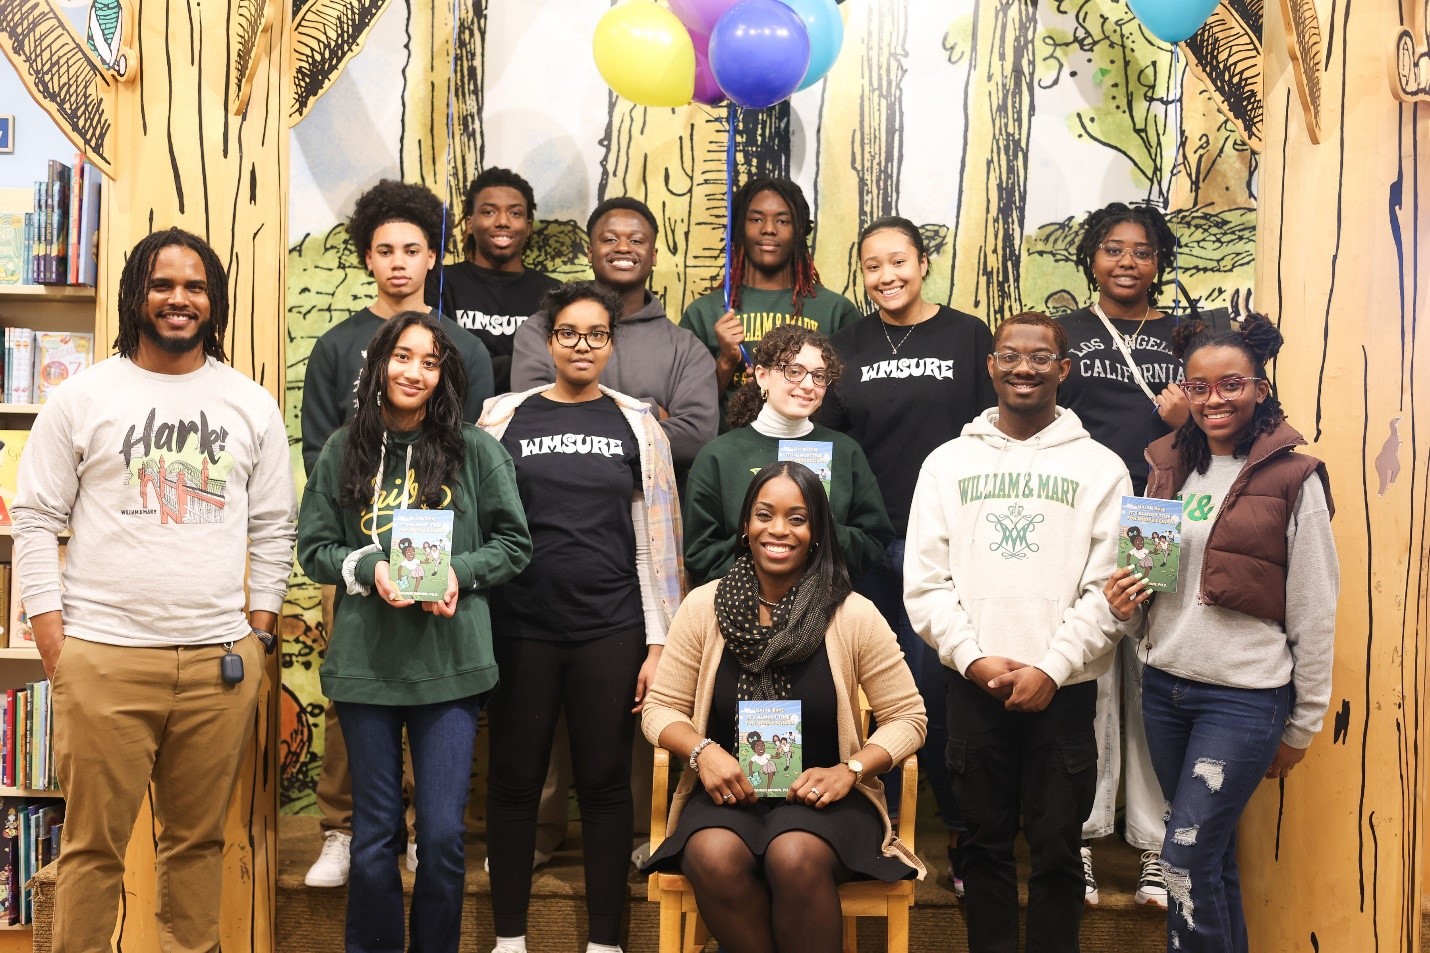 WMSURE students and program staff joined Dr. Terainer Brown from the School of Education for an inaugural “Career Café” event for K-8 students in Newport News, Virginia on Feb. 24. (Courtesy photo)